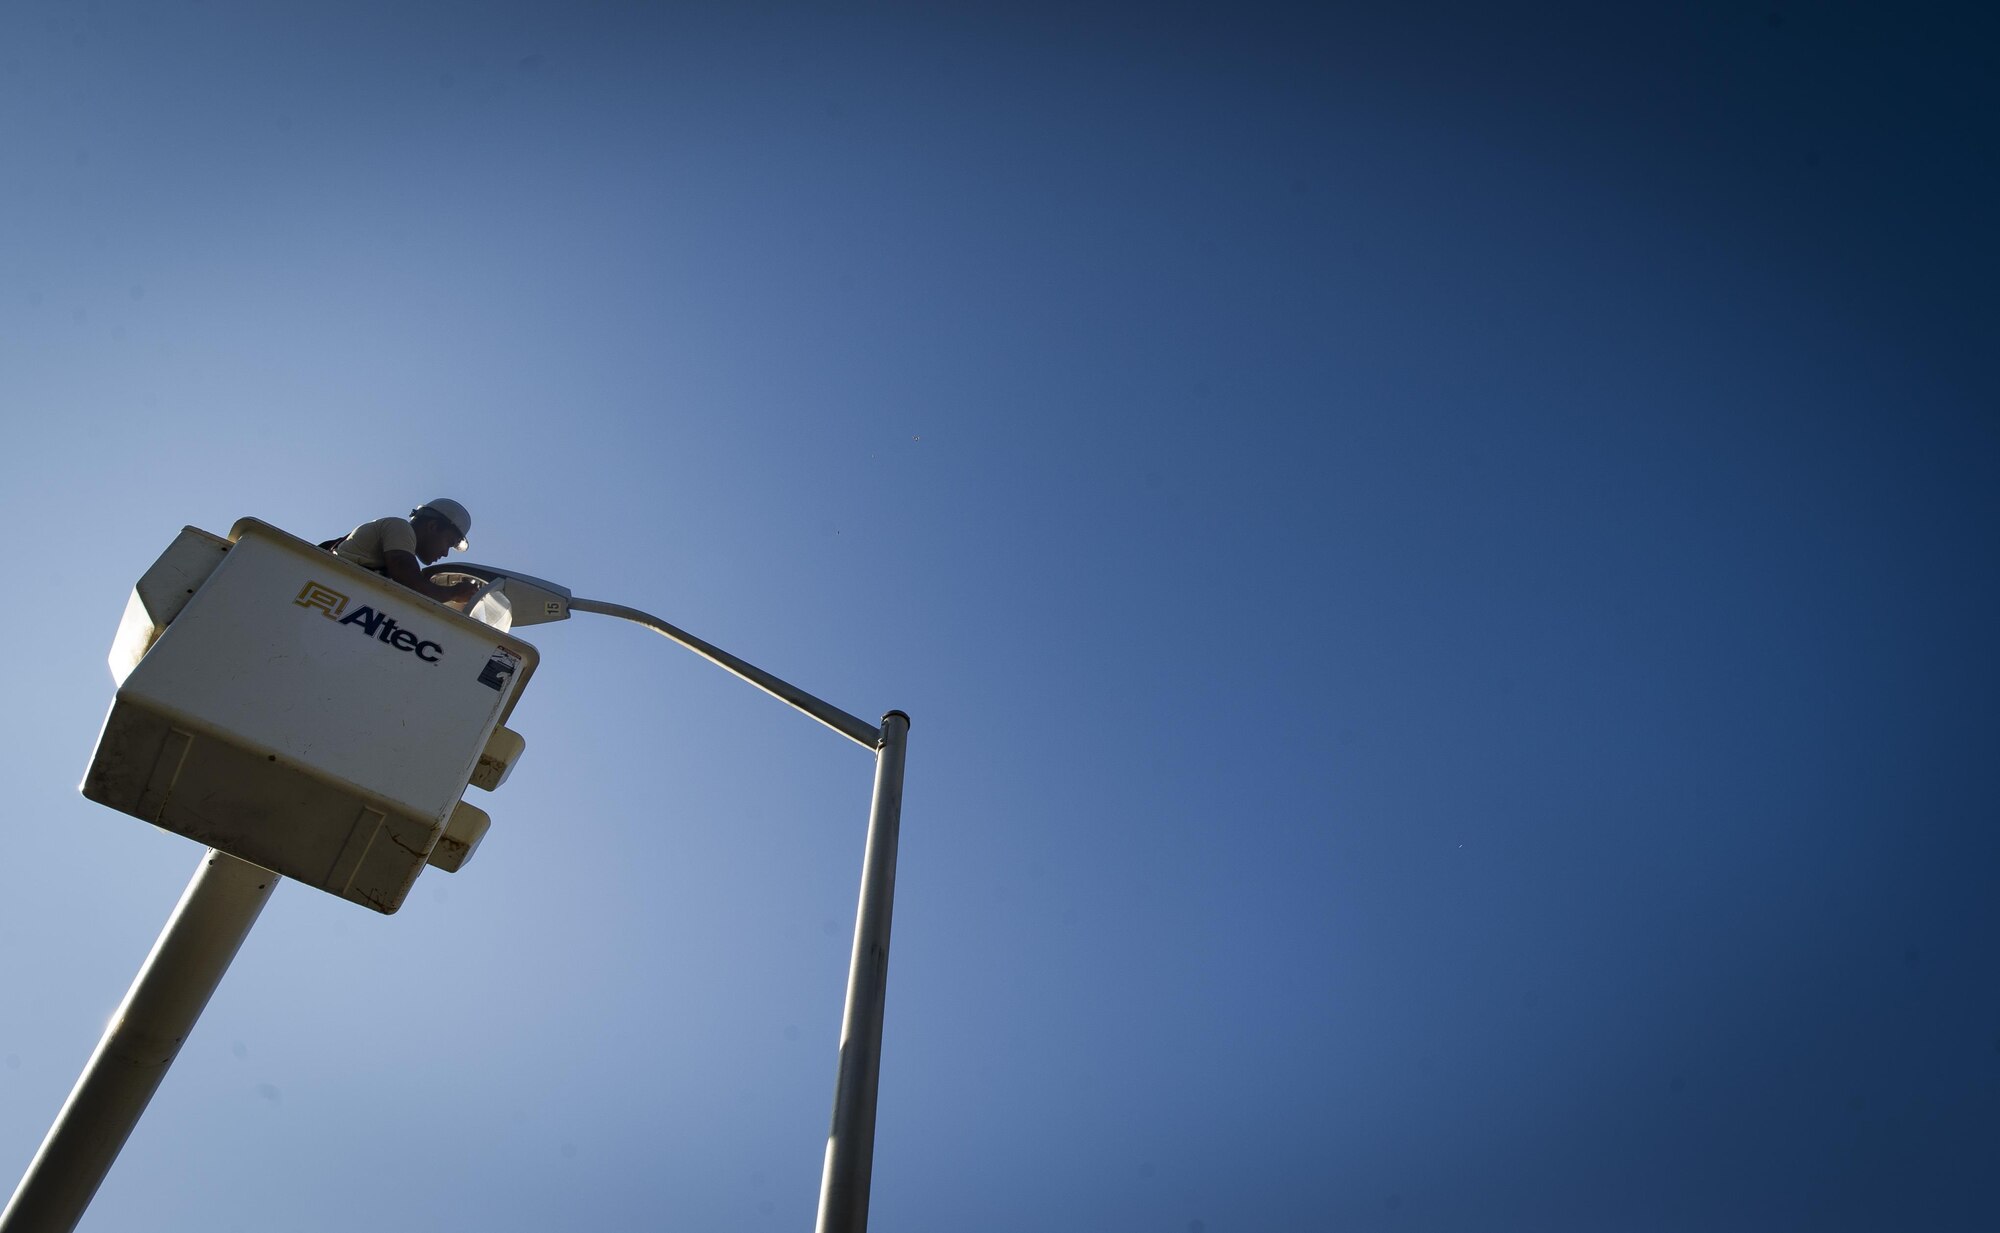 Senior Airman Darren Pizarro, 27th Special Operations Civil Engineer Squadron electrical systems specialist, replaces a faulty bulb in a light pole at Cannon Air Force Base, N.M., June 27, 2017. Specialists such as Pizarro are responsible for installing, repairing and maintaining electrical networks, ensuring that primary sources of energy are always available. From space command communicating with satellites to hospitals operating lifesaving equipment, every Air Force function depends on this crucial service provided by these experts. (U.S. Air Force photo by Senior Airman Lane T. Plummer)